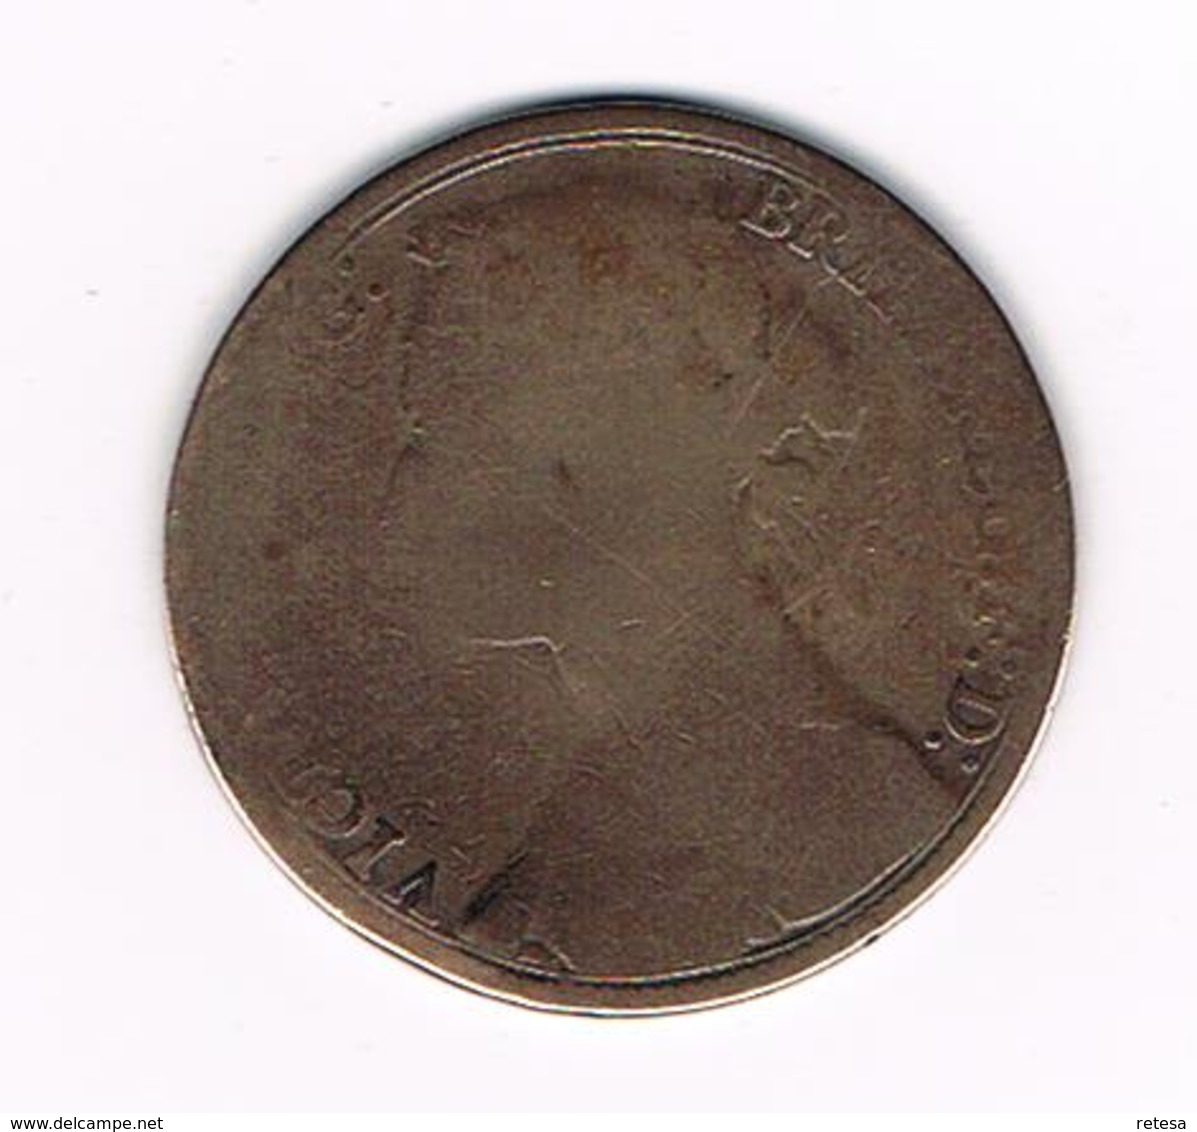 // GREAT BRITAIN  1 PENNY 1879  VICTORIA - D. 1 Penny